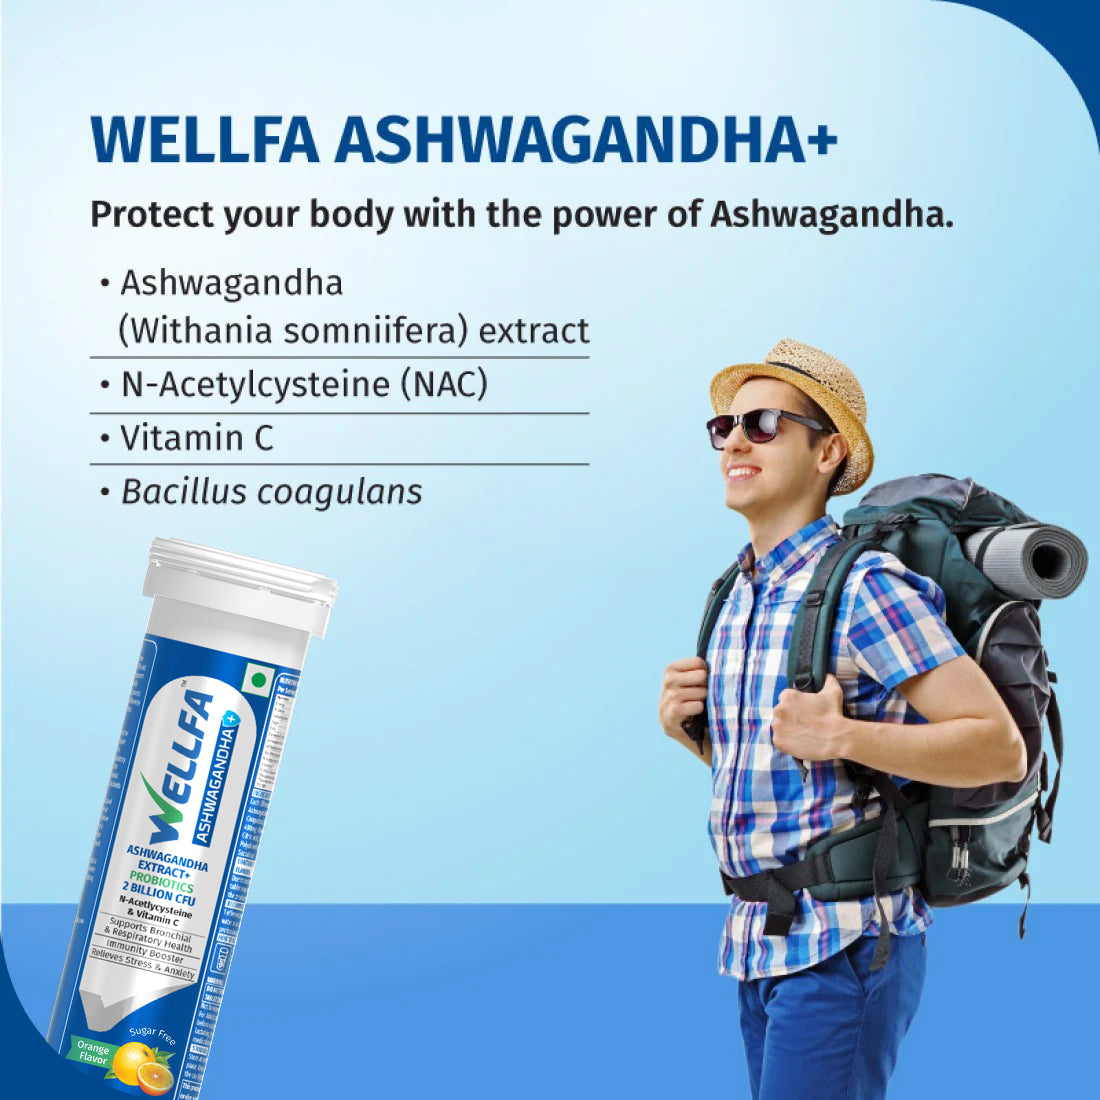 Protect your body with the power of WELLFA Ashwagandha+